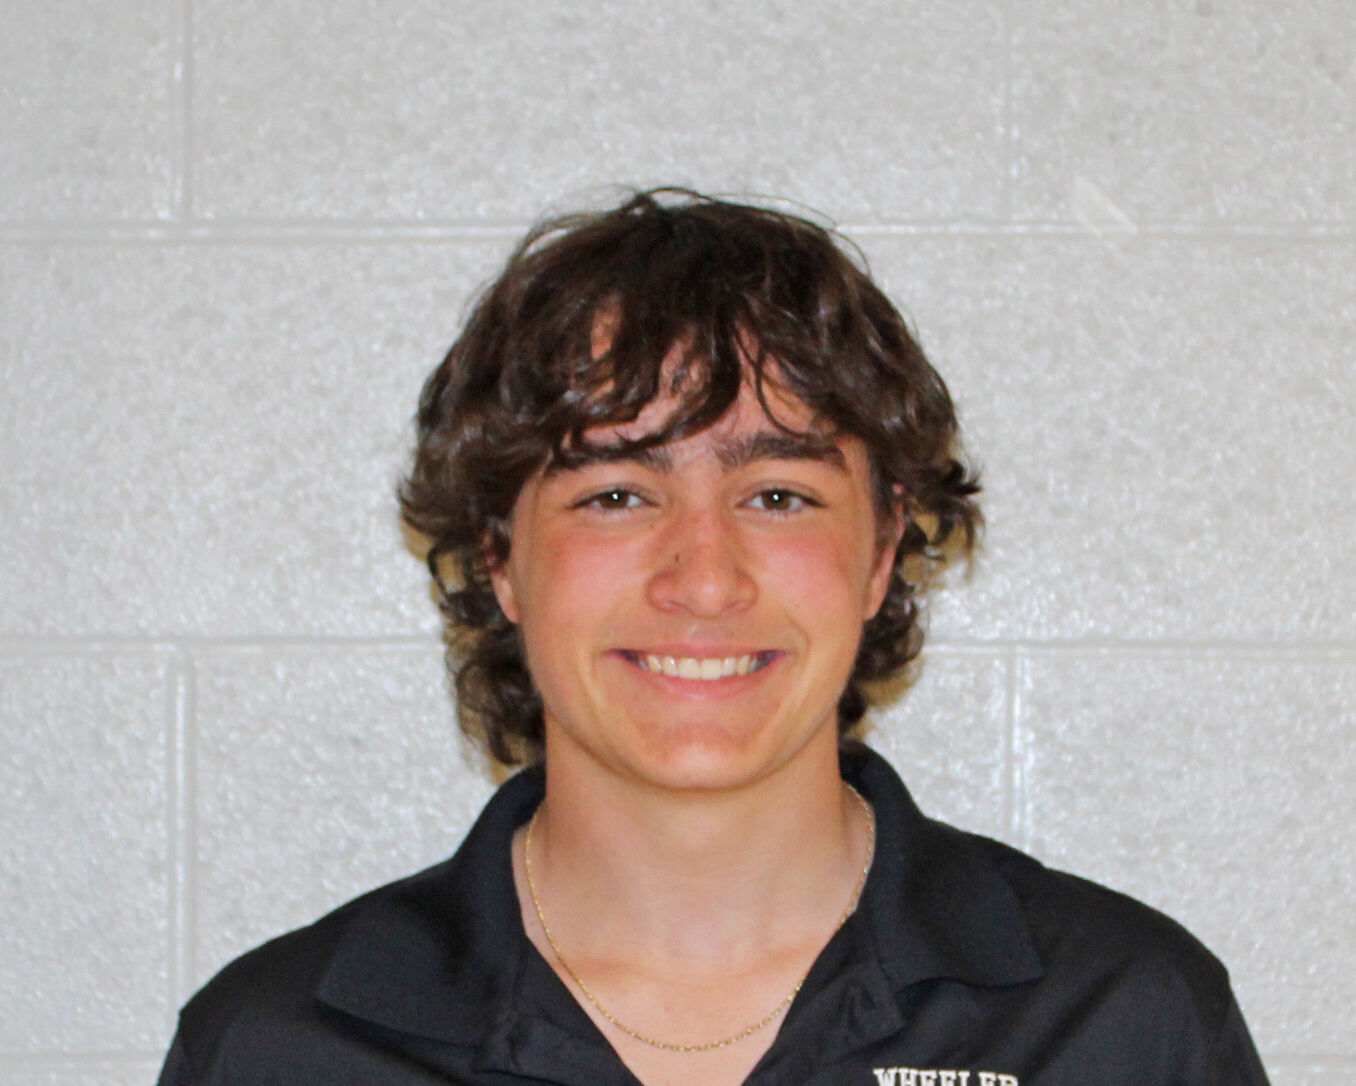 Boys golf: Wheeler improves to 11-0; Stonington’s Torres medals with 37